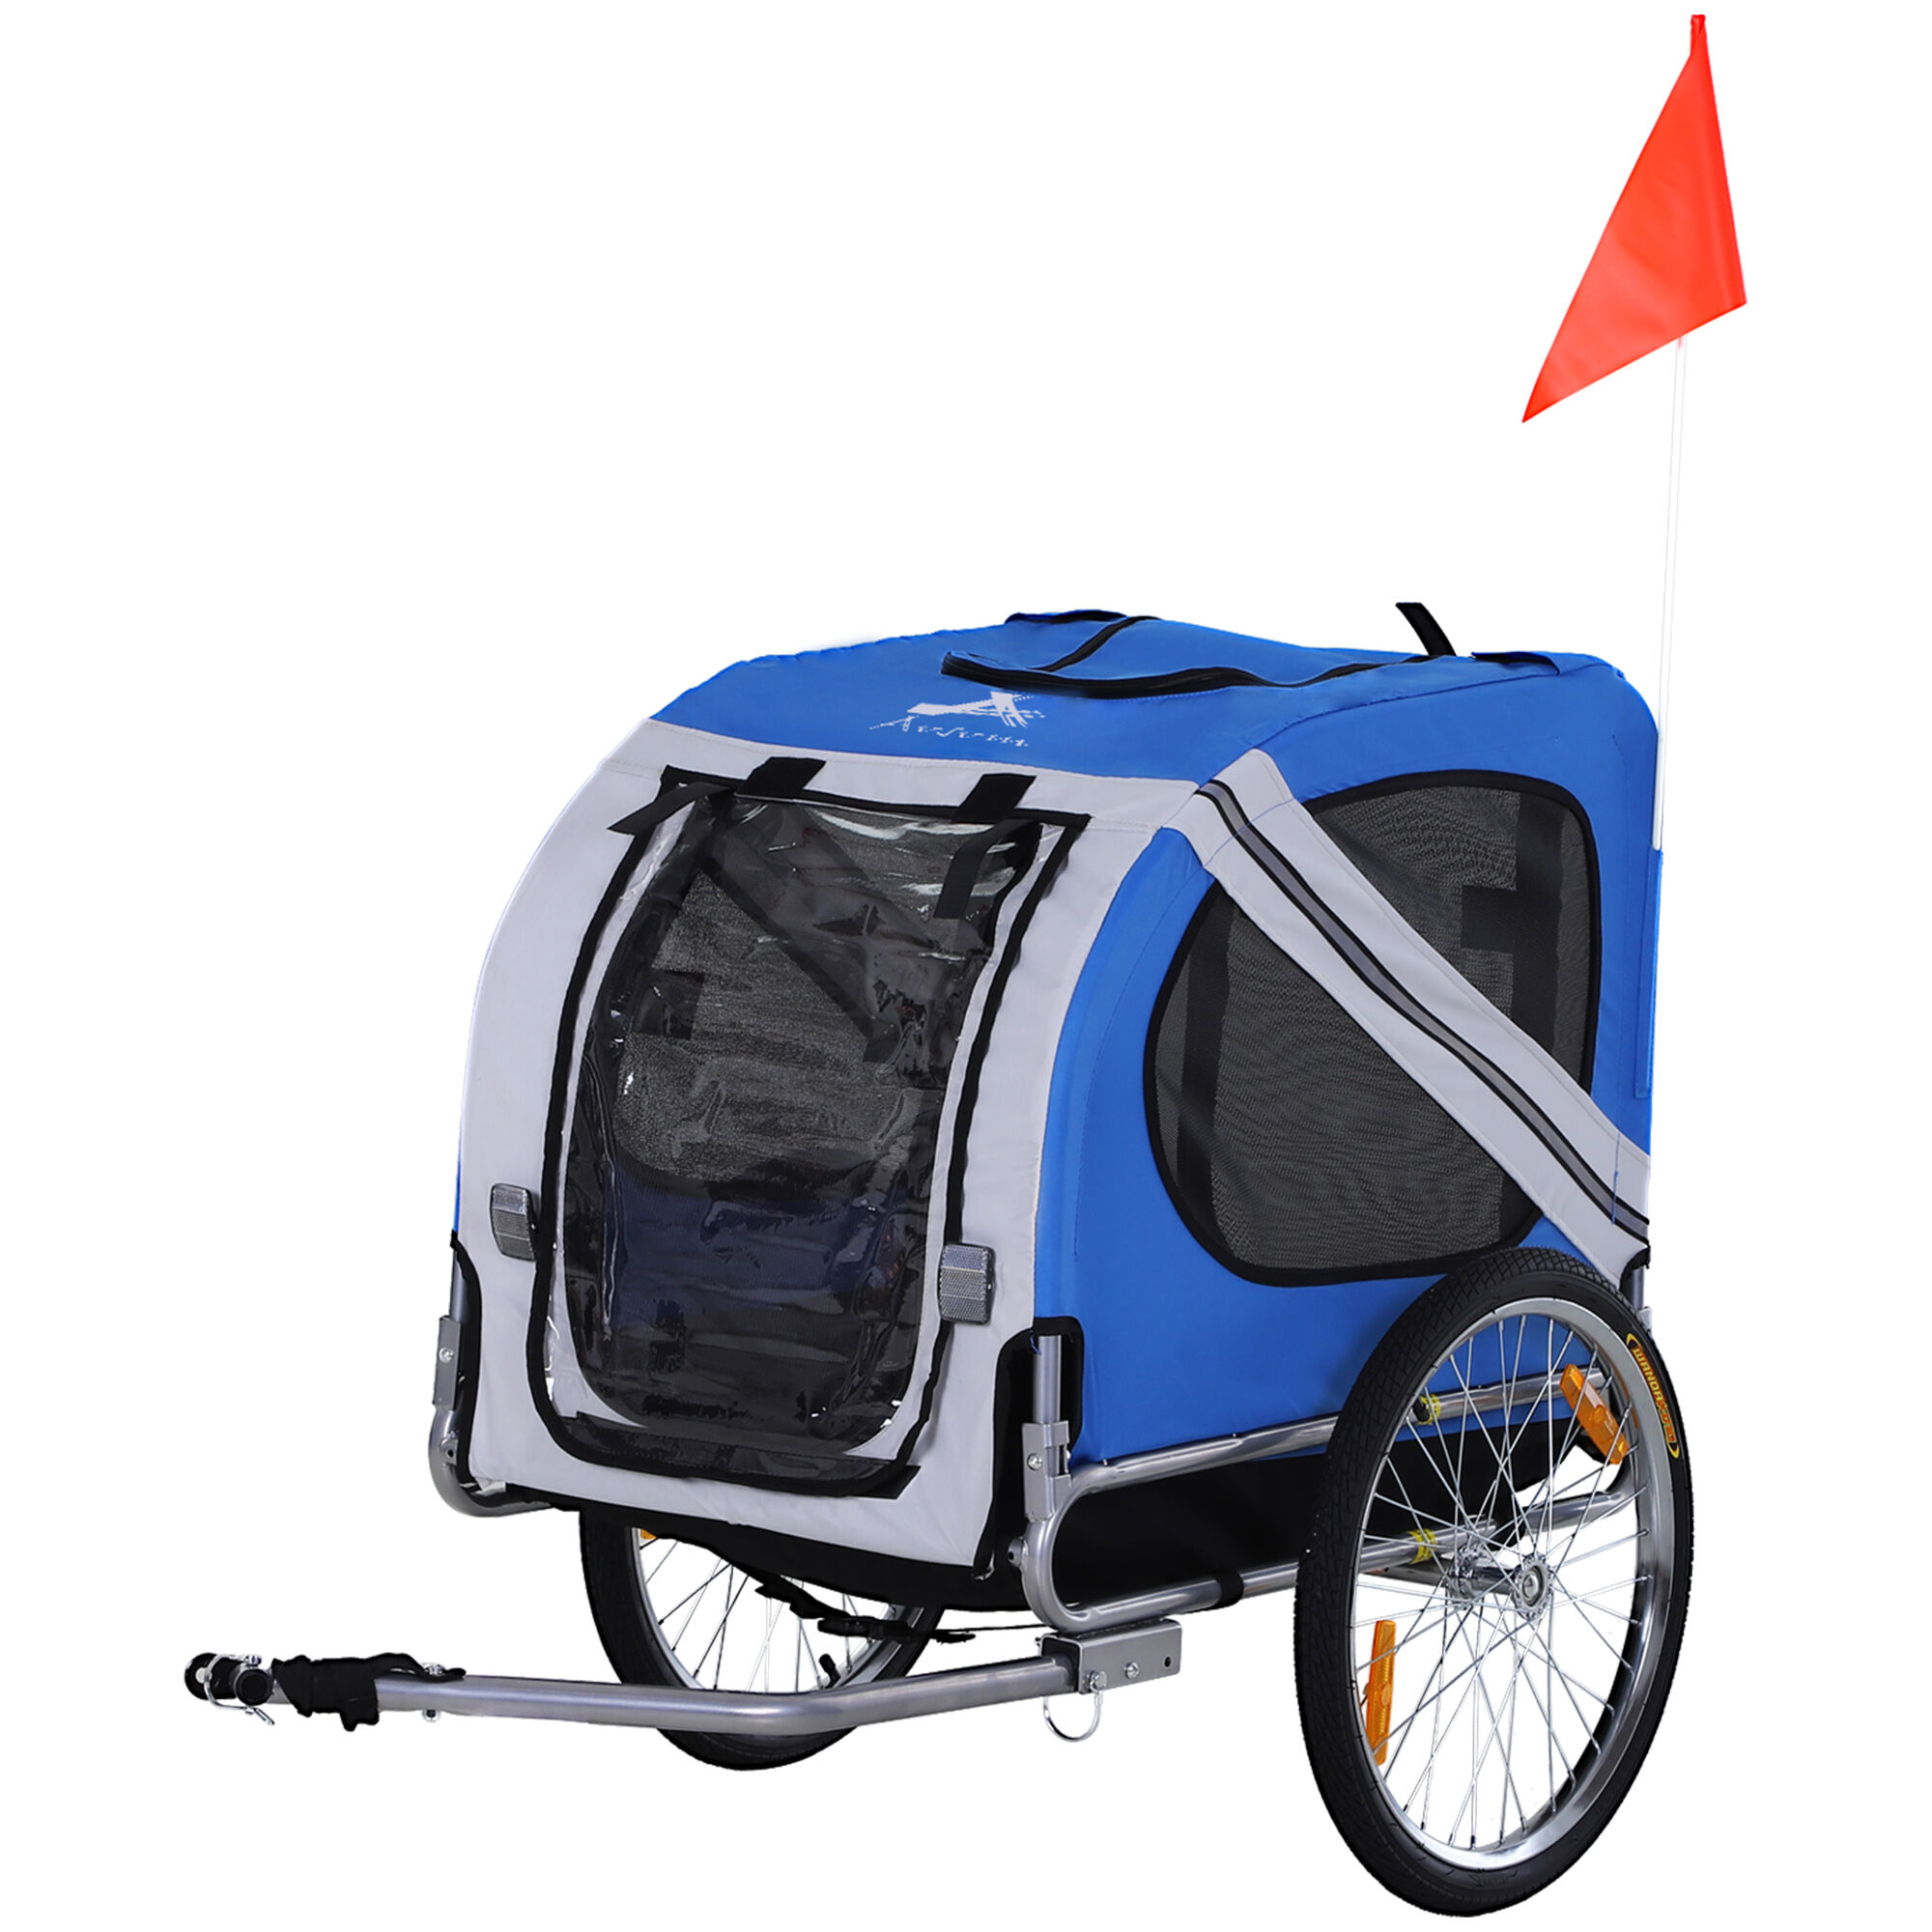 Aosom Dog Bike Trailer Pet Cart Bicycle Wagon Cargo Carrier Attachment for Travel with 3 Entrances for Off-Road & Mesh Screen - Light Blue / Grey